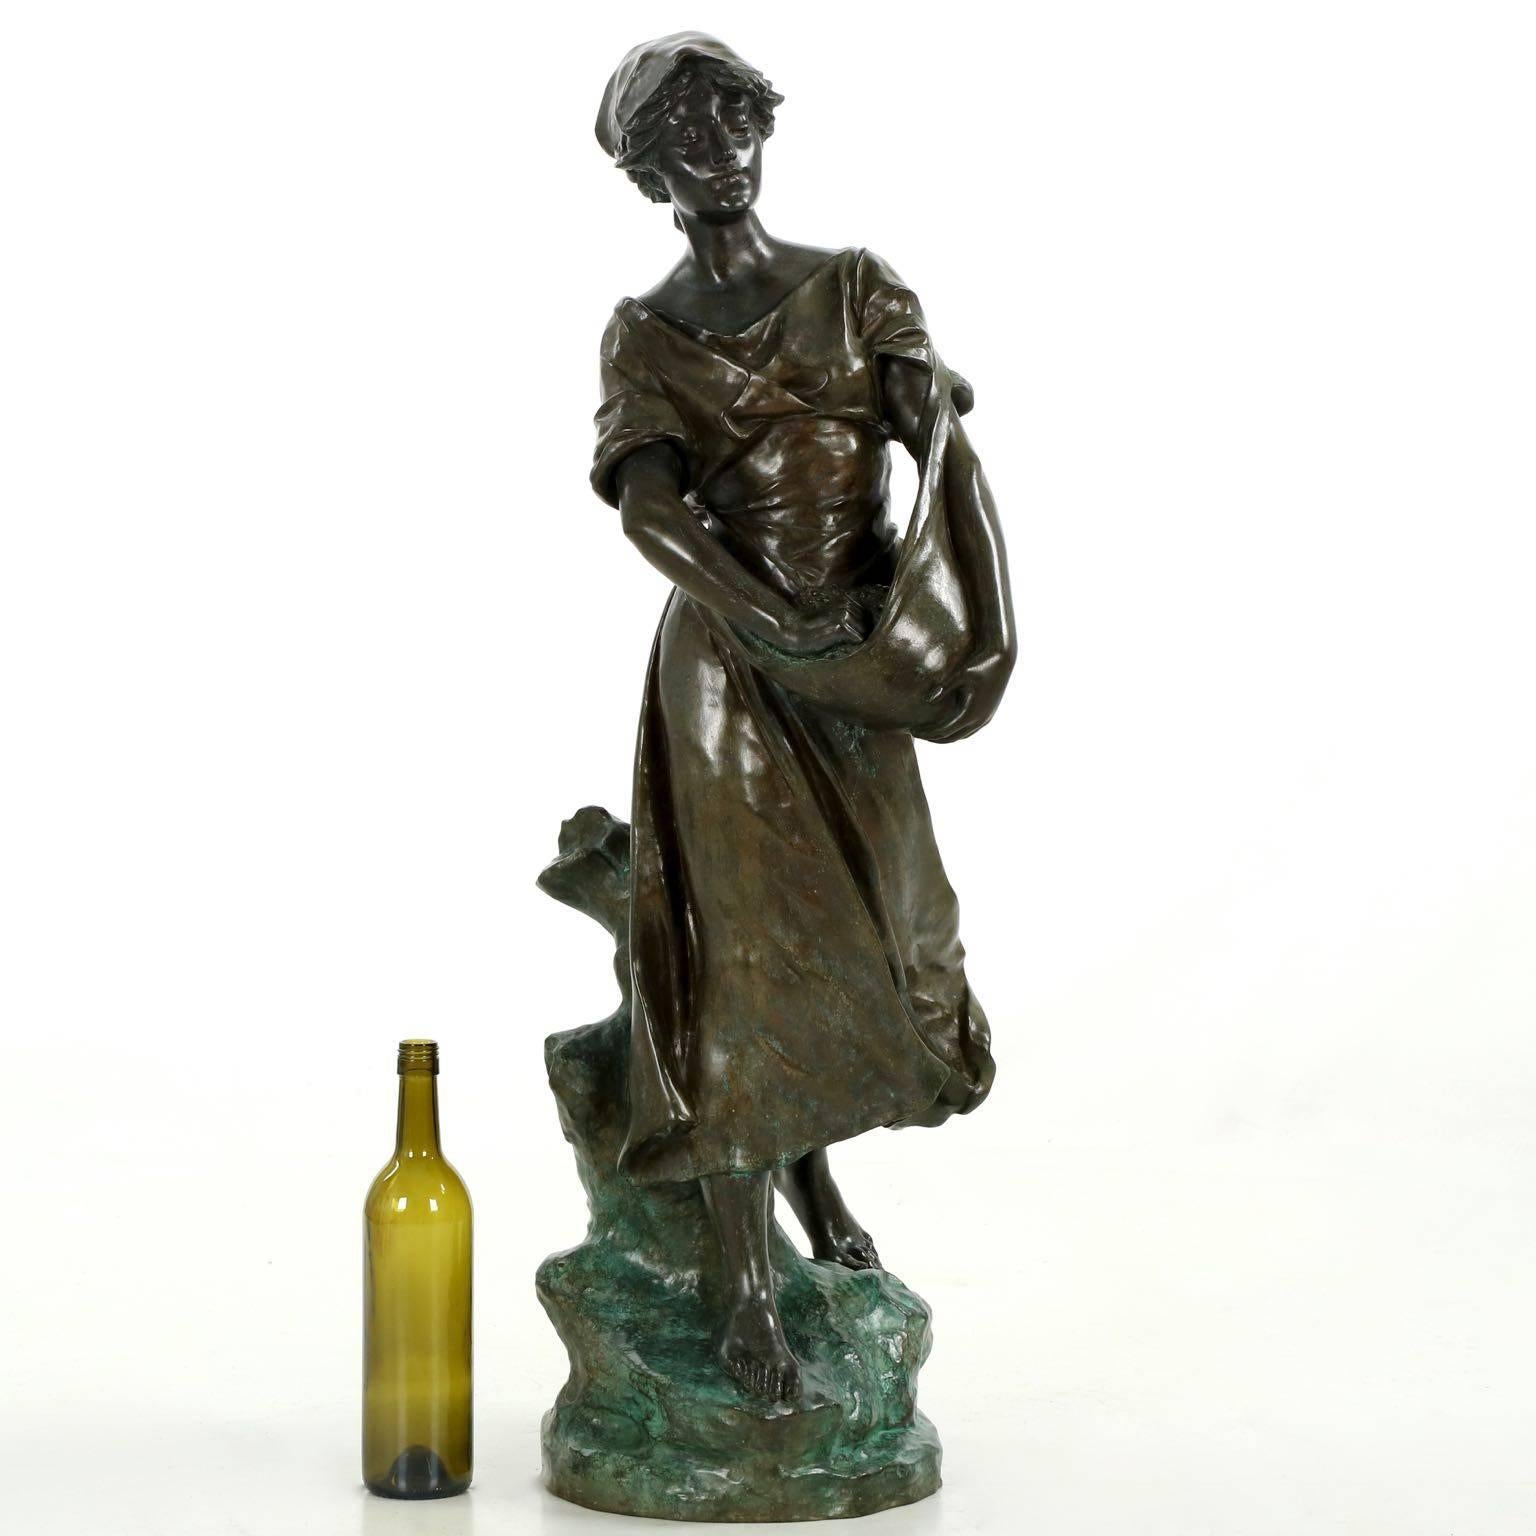 Originally exhibited at Salon as a plaster sculpture in 1902, the model of The Sower (“La Semeuse”) depicts a young maiden walking barefoot through the fields with a large bag of seed strung around her shoulder as she plants for the future harvest.